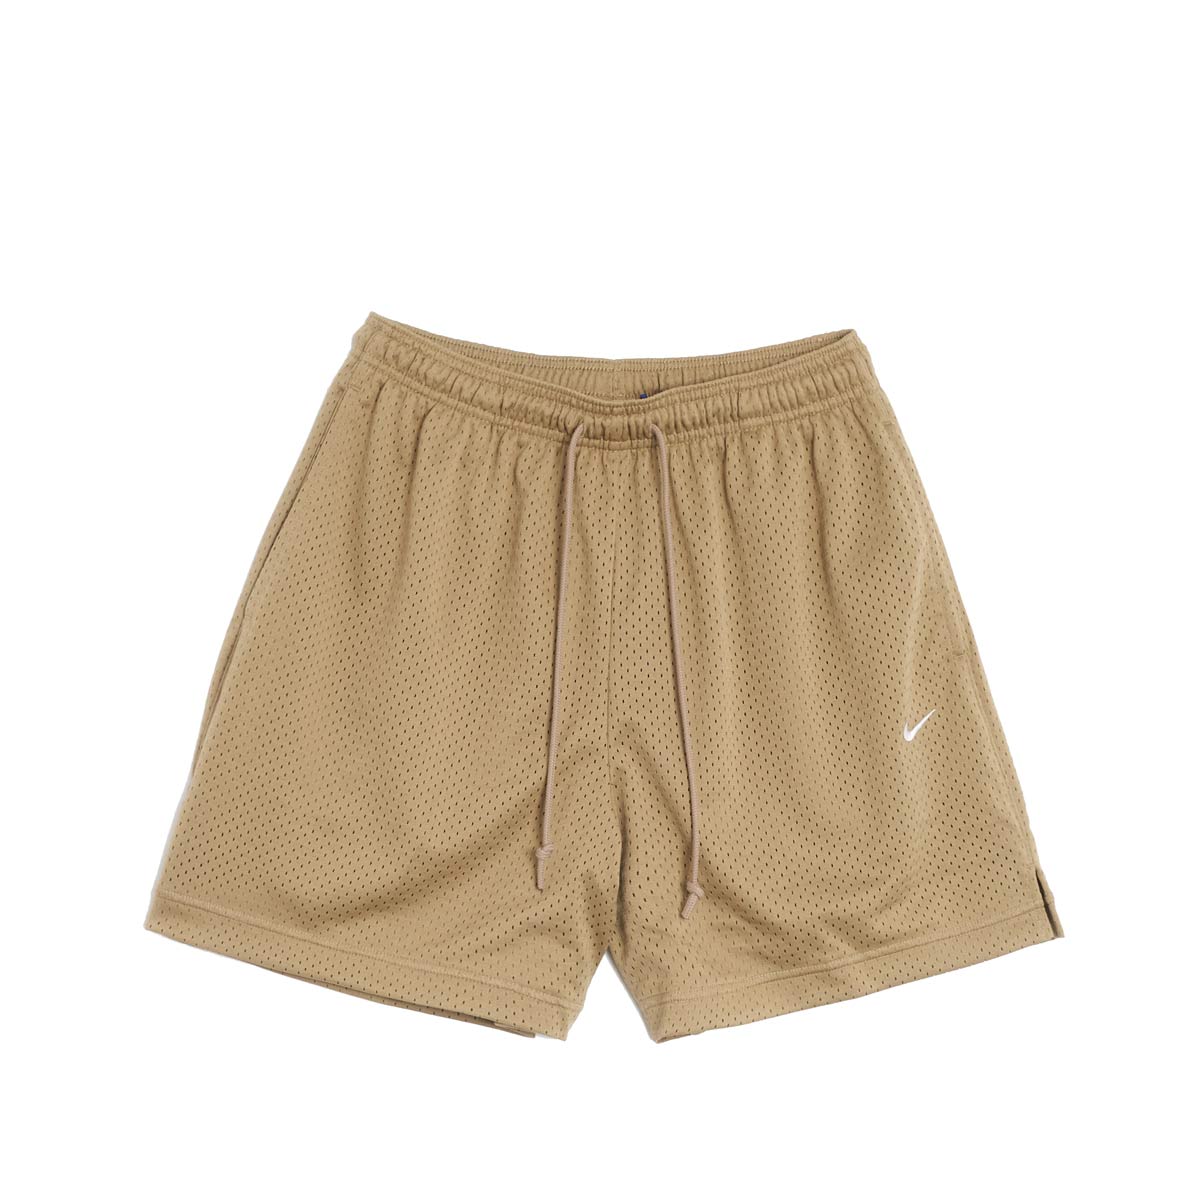 Authentic Shooting Shorts